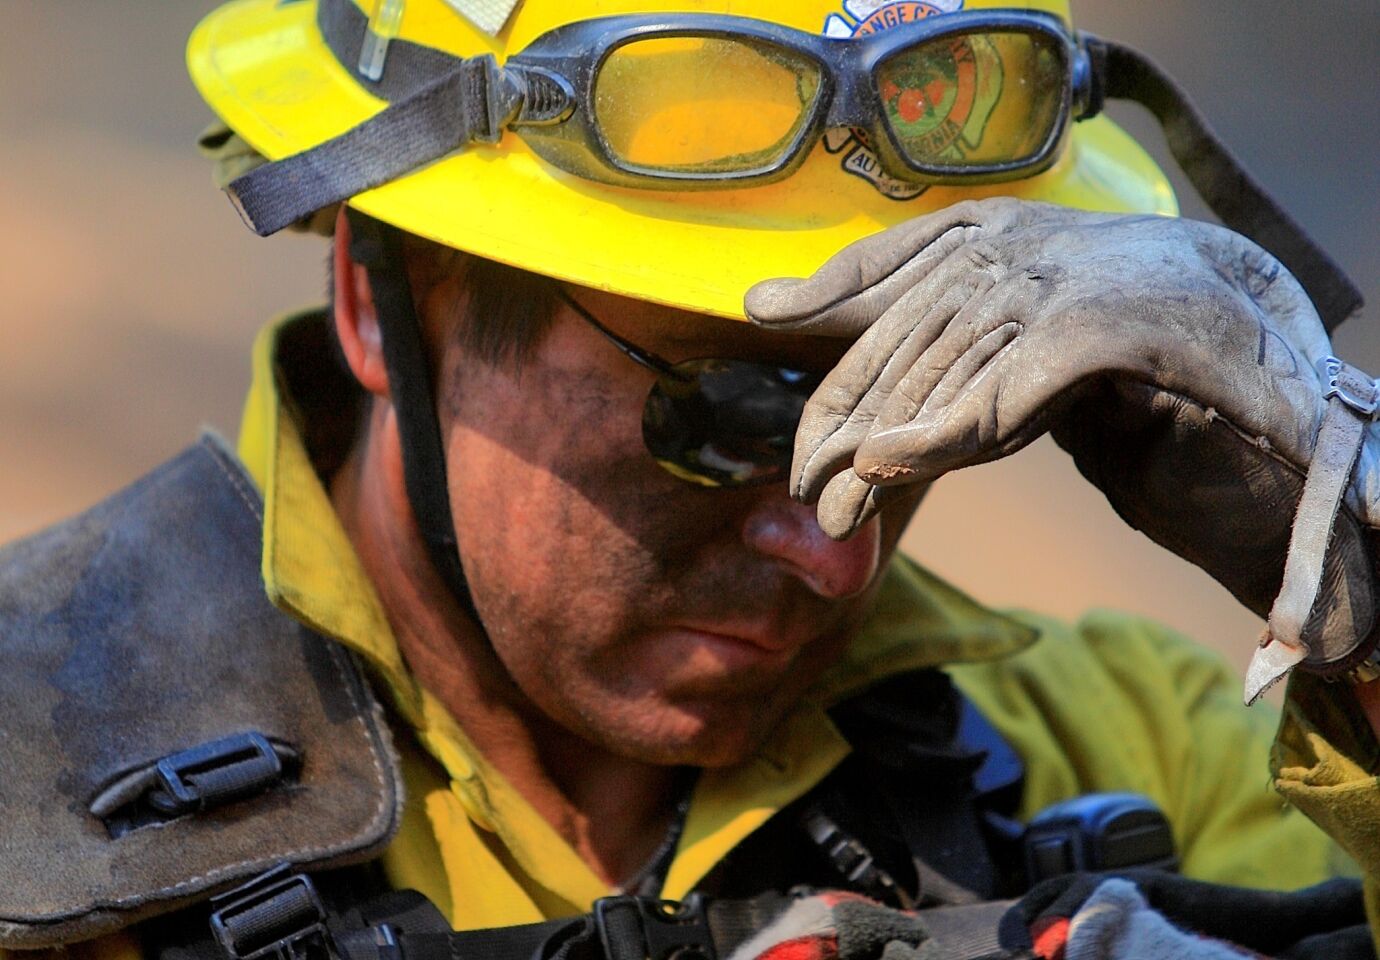 Orange County firefighter Duke Juarez takes a break after hiking up a steep hillside in high heat while extinguishing hot spots near homes on Silverado Canyon Road as crews battle the Silverado Fire.